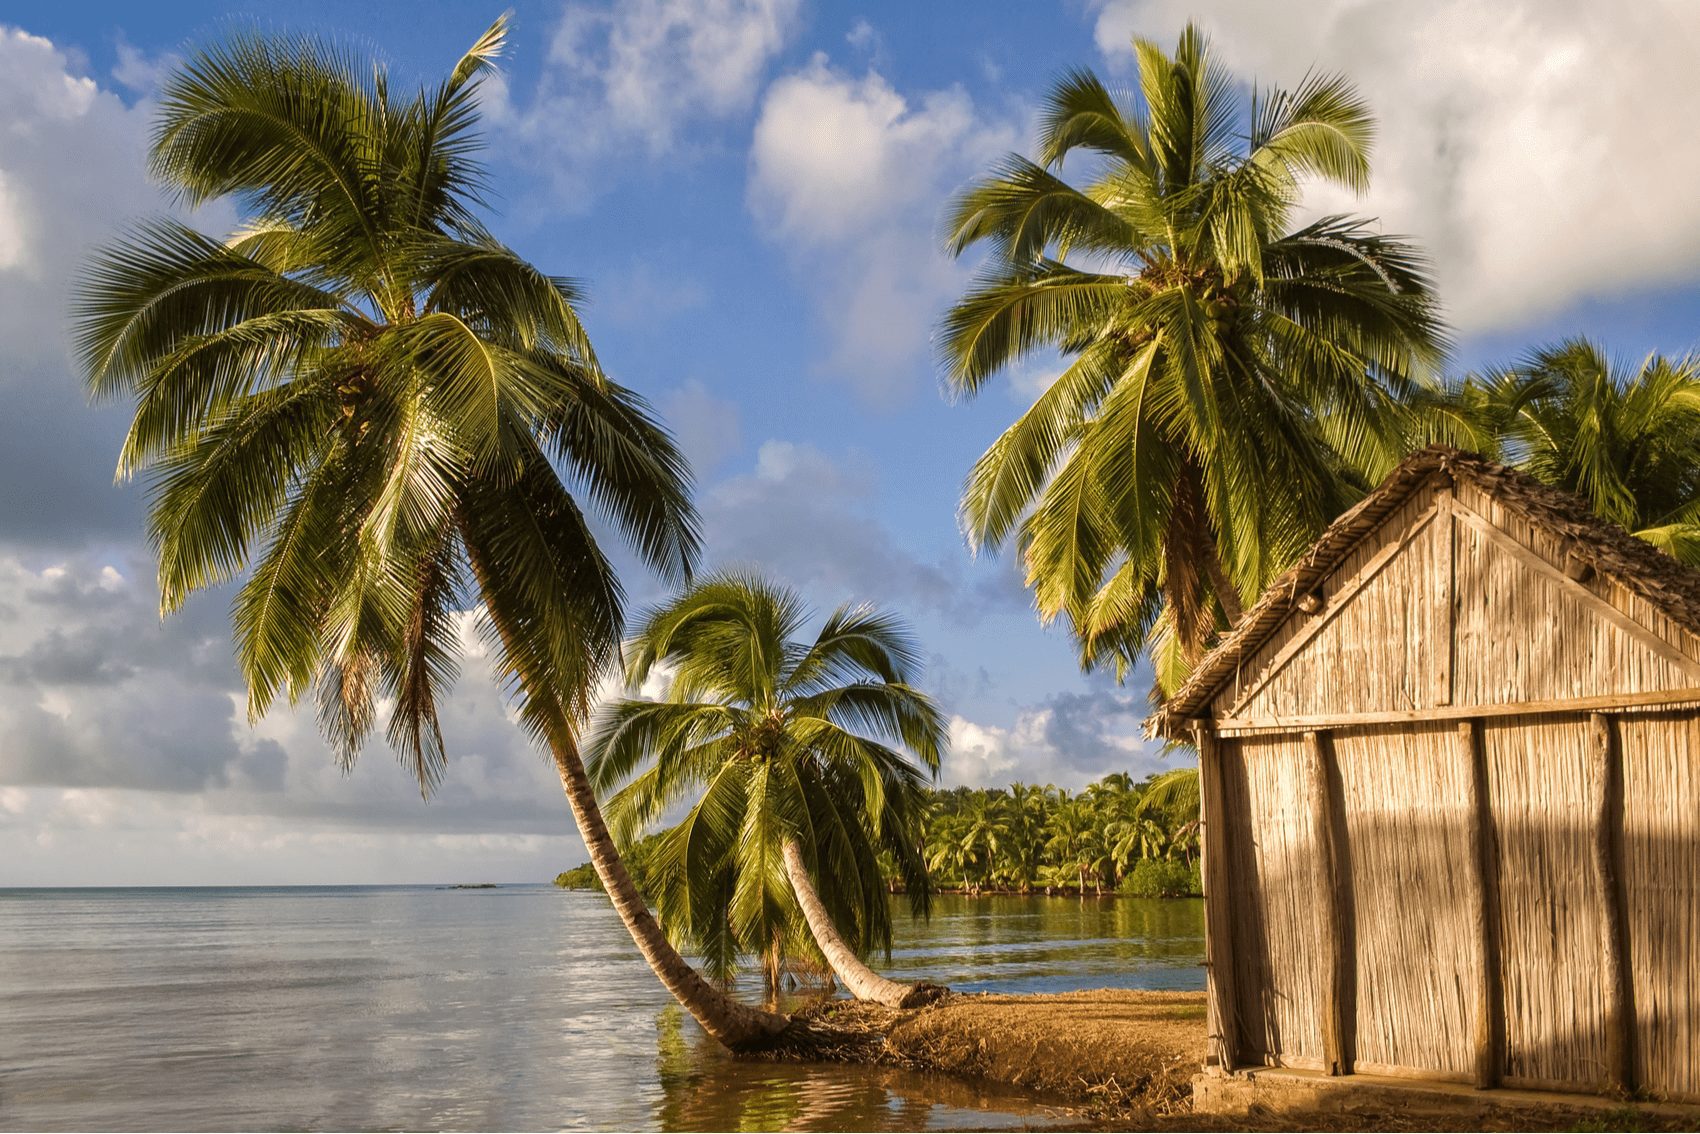 Nosy Boraha Island, also known as Sainte Marie Island, in Madagascar has a few palm trees extending up from the ground next to a stick hut